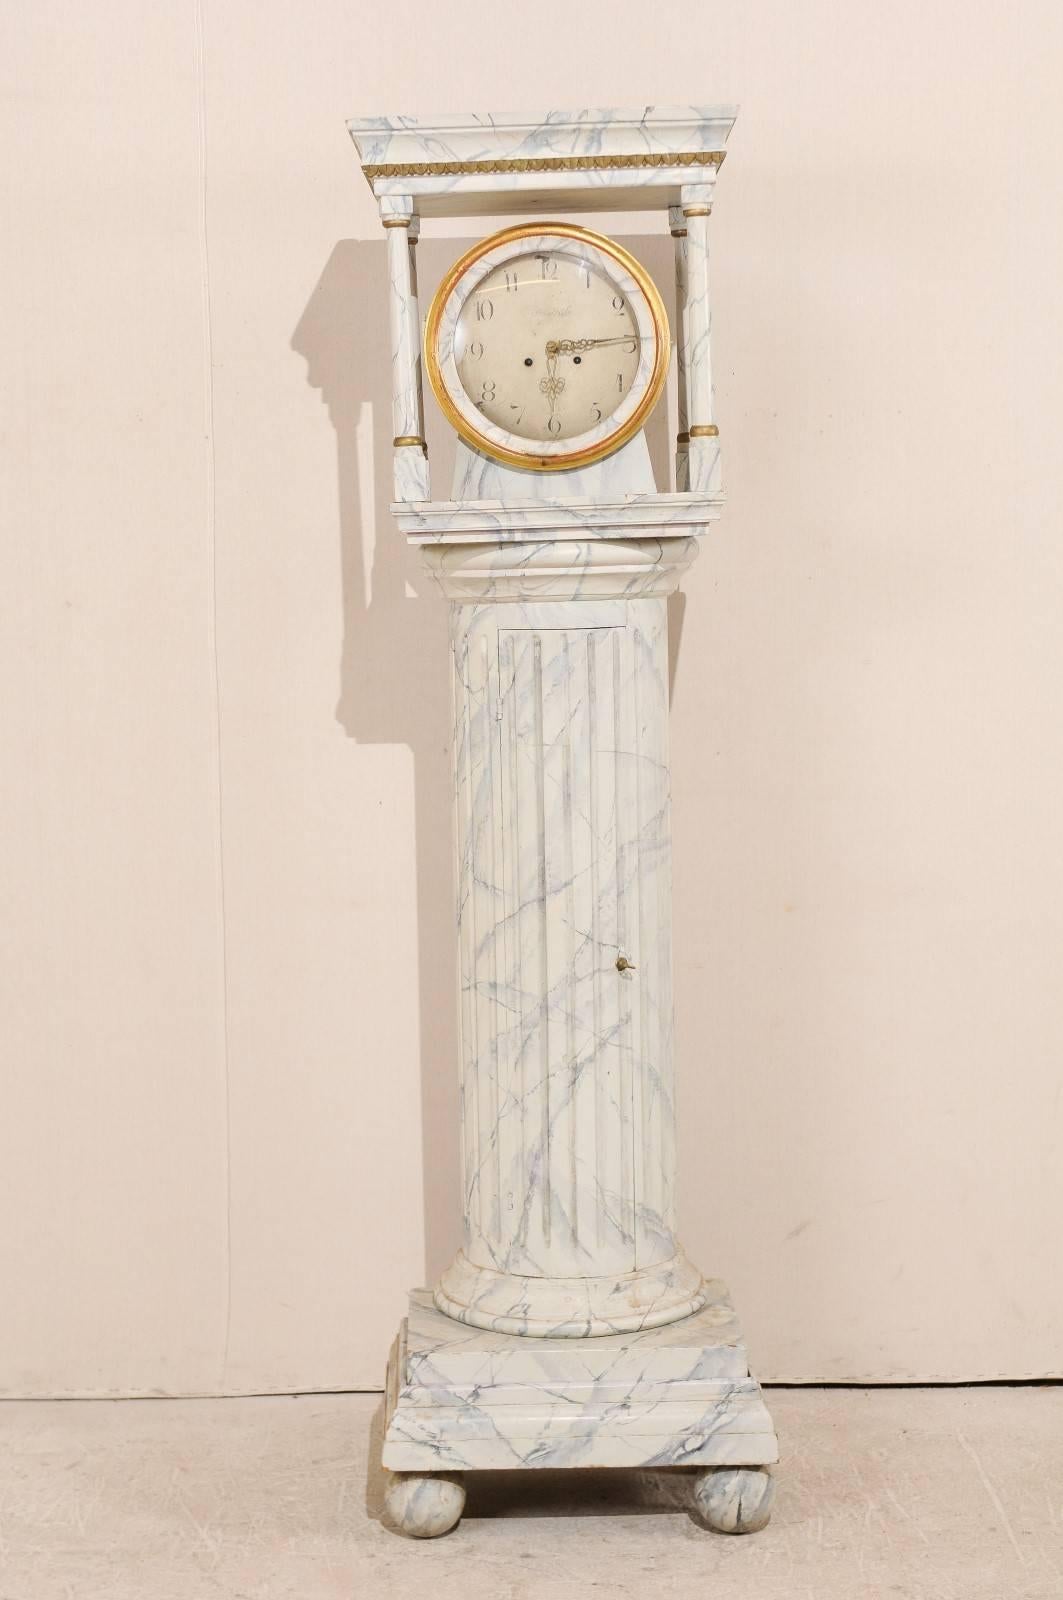 A Swedish 19th century long case clock. This Swedish floor clock, circa 1820s, features a semi-circular column body with vertical fluting and faux marbling throughout. This clock retains it's original metal face, hands and movement. The head, with